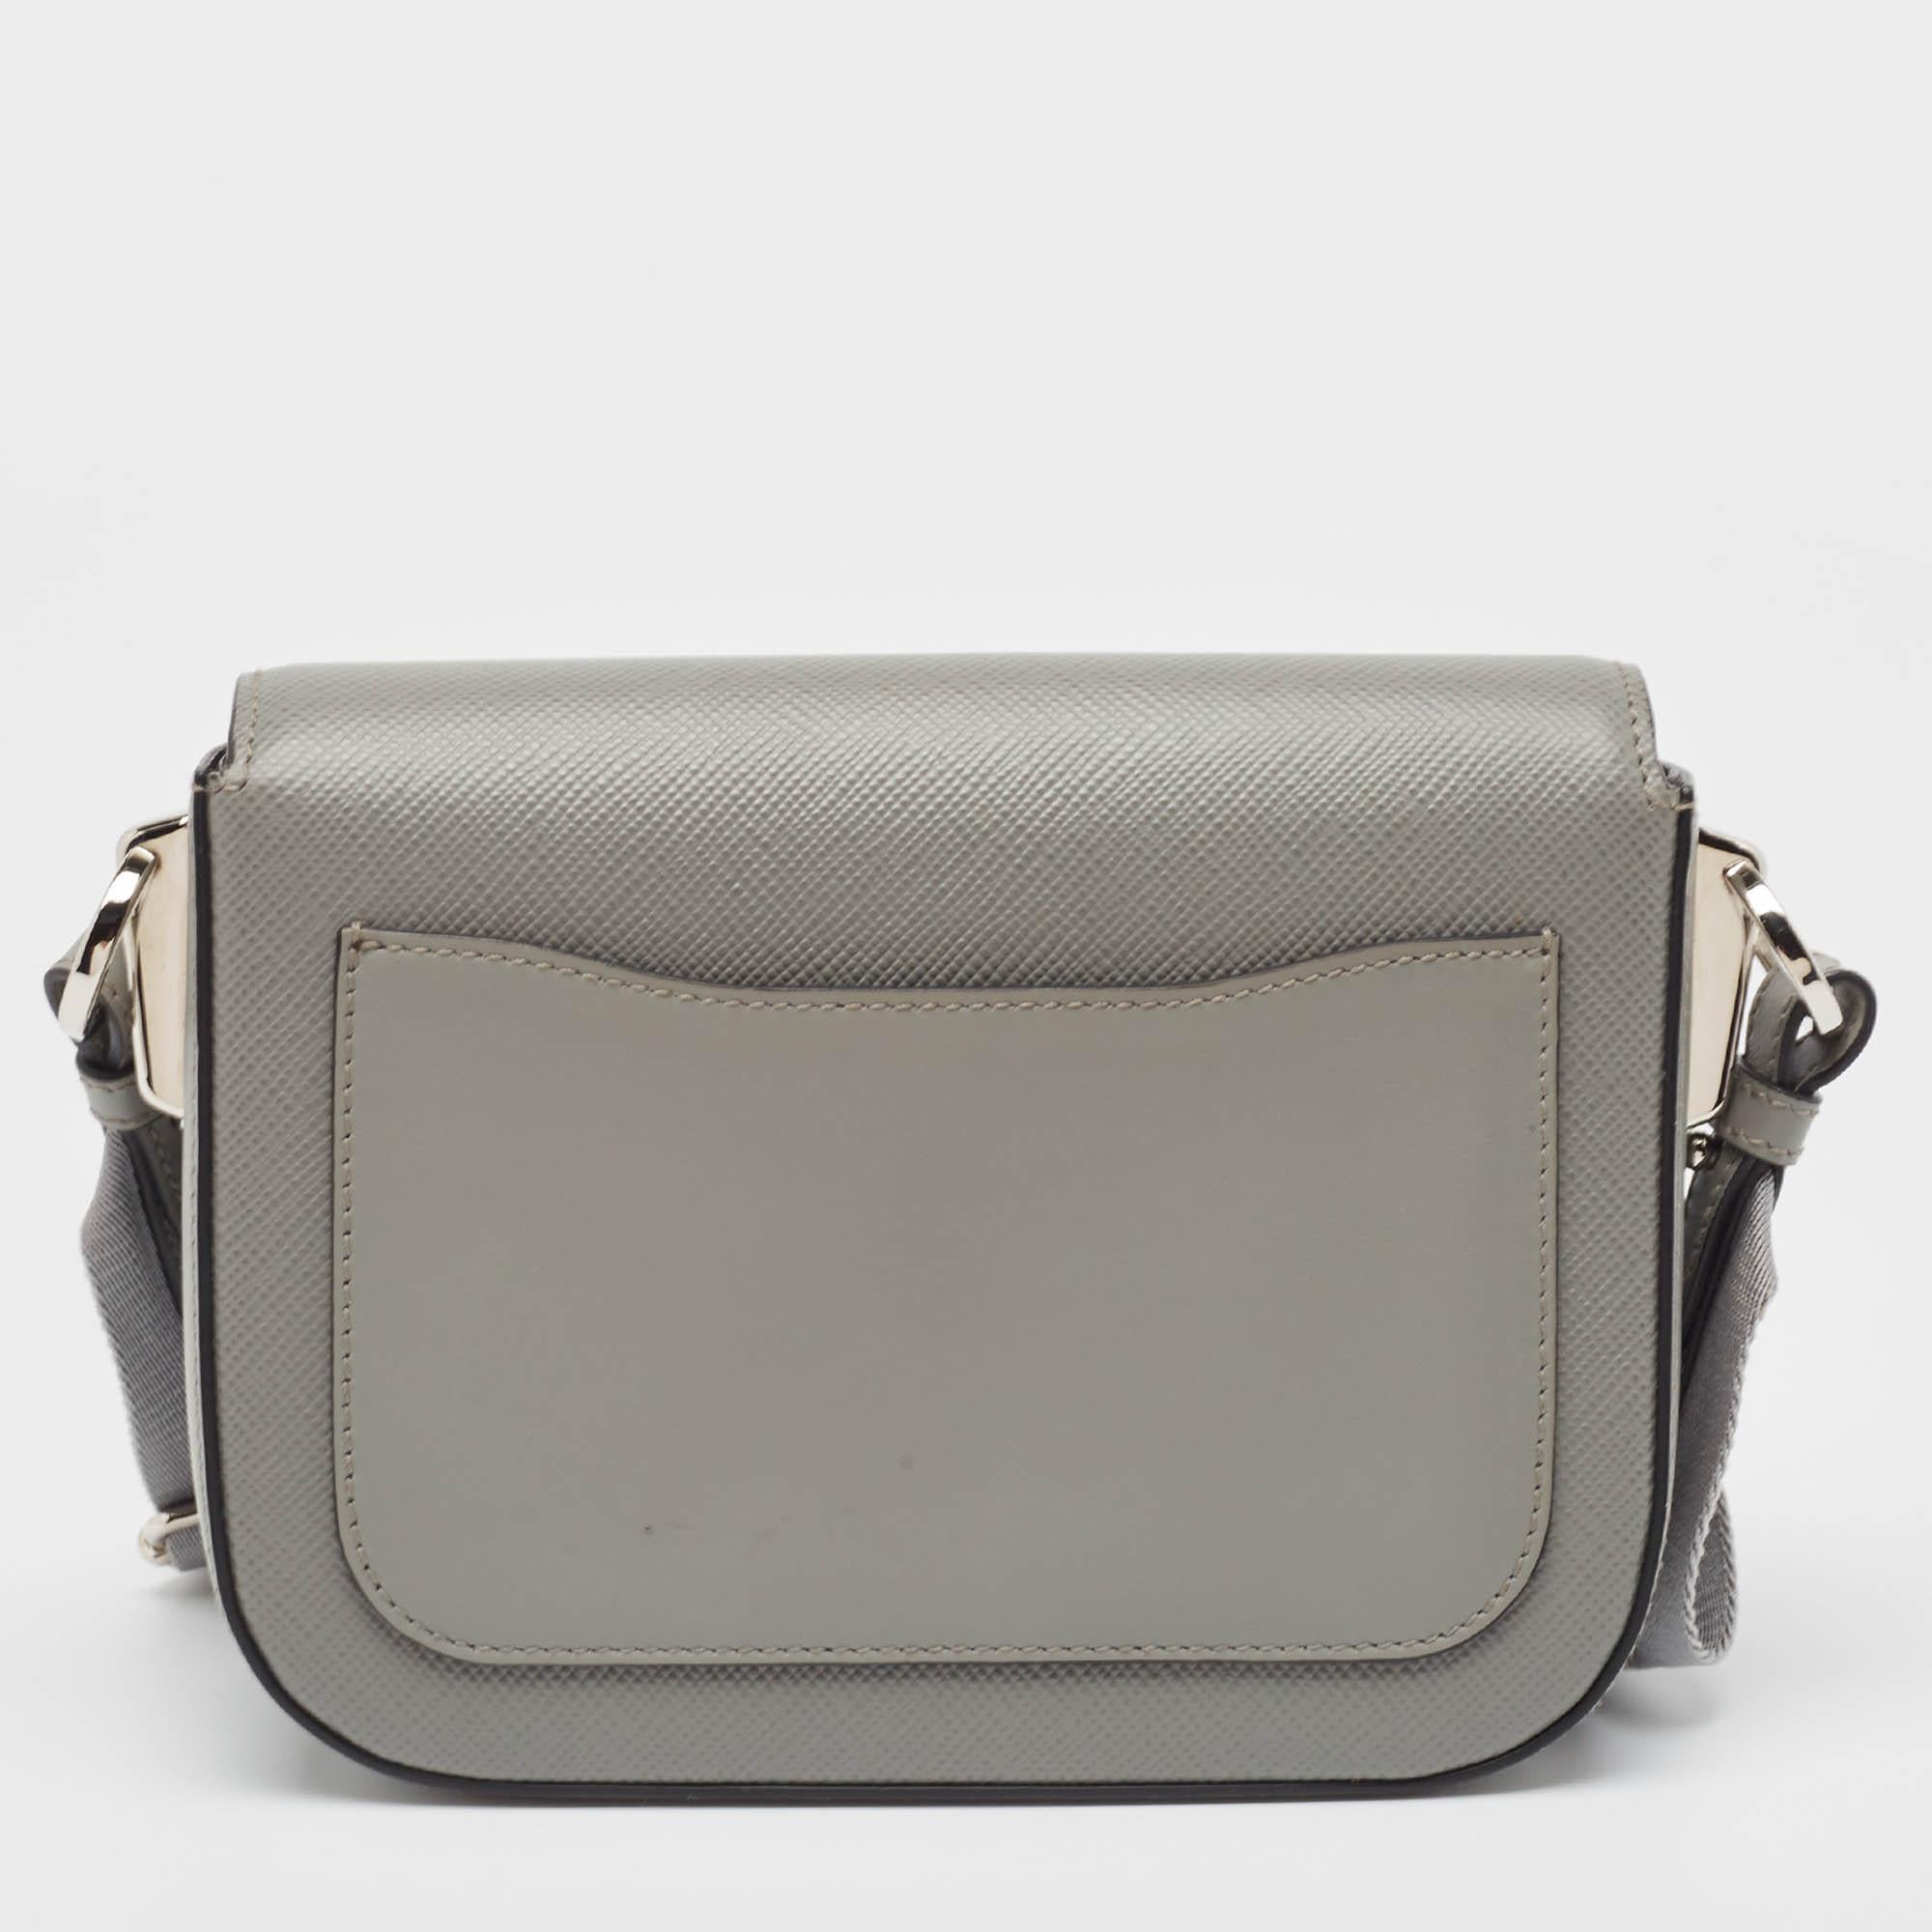 For a look that is complete with style, taste, and a touch of luxe, this shoulder bag is the perfect addition. Flaunt this beauty on your shoulder at any event and revel in the taste of luxury it leaves you with.

Includes: Original Dustbag,